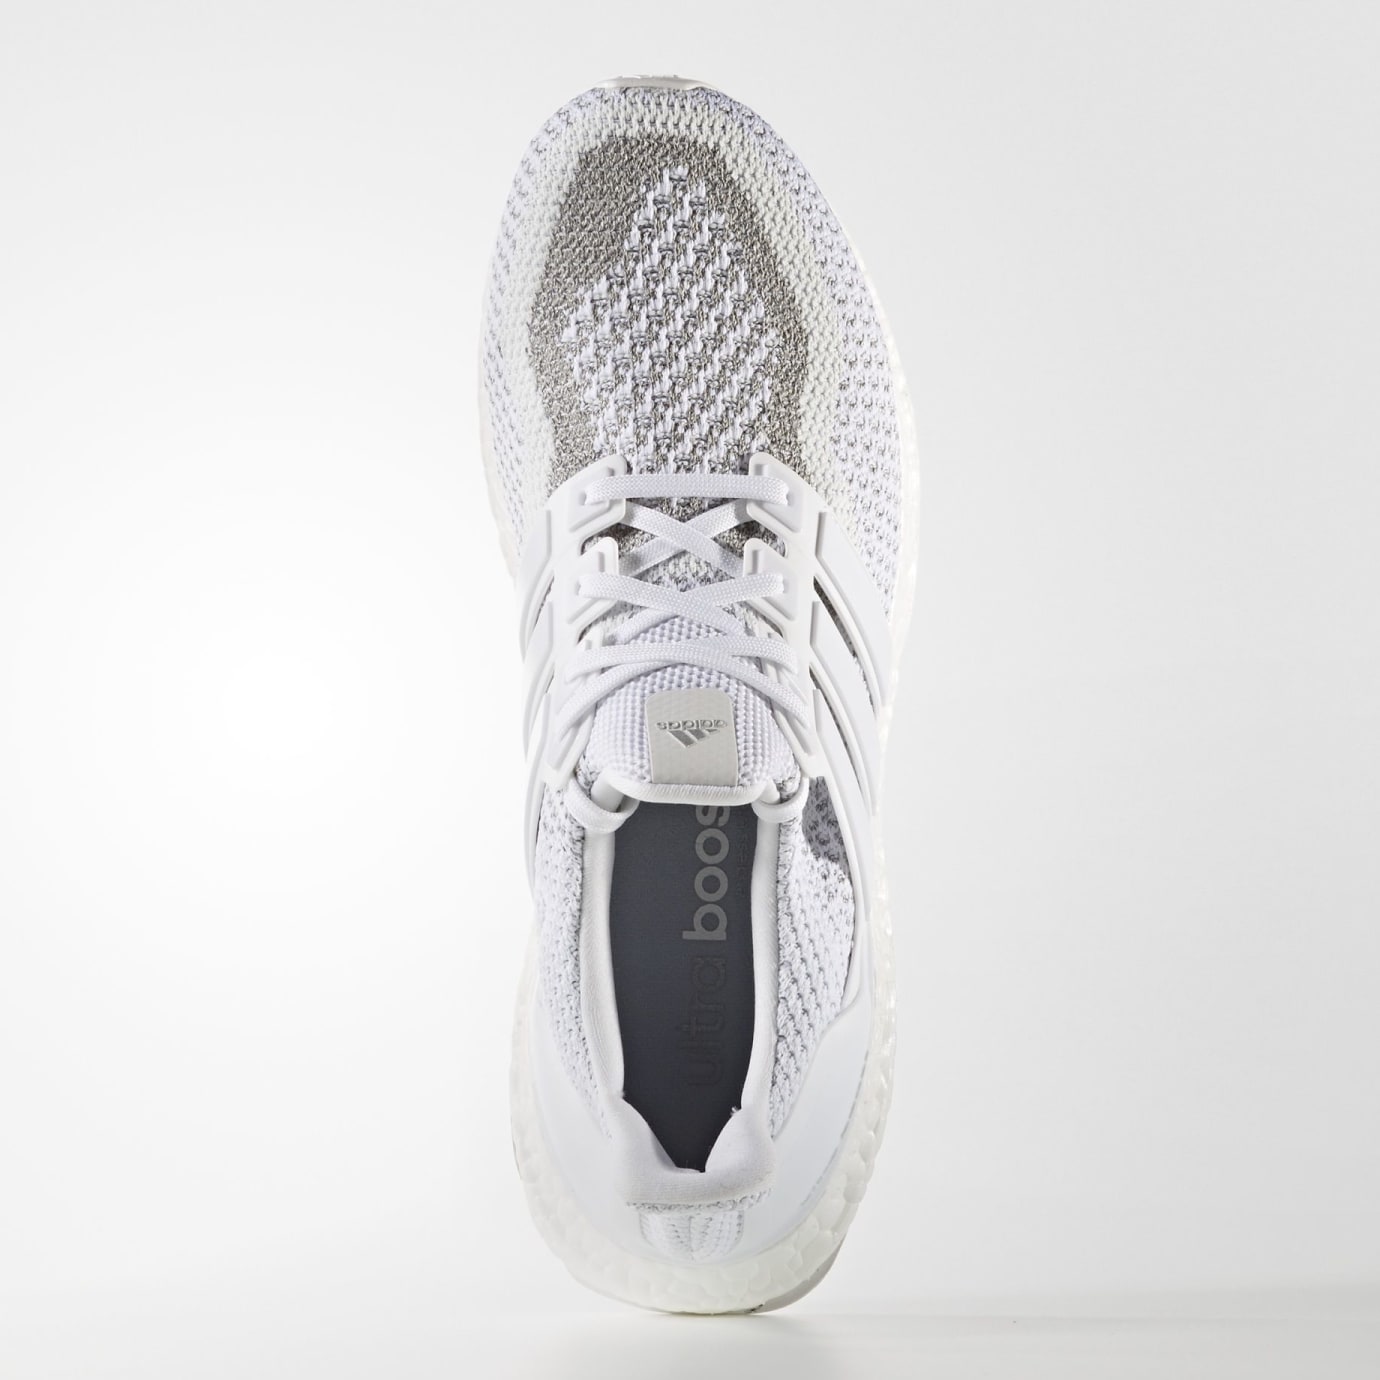 Adidas Ultra Boost 2 0 White Reflective 18 Release Date 3928 Sole Collector